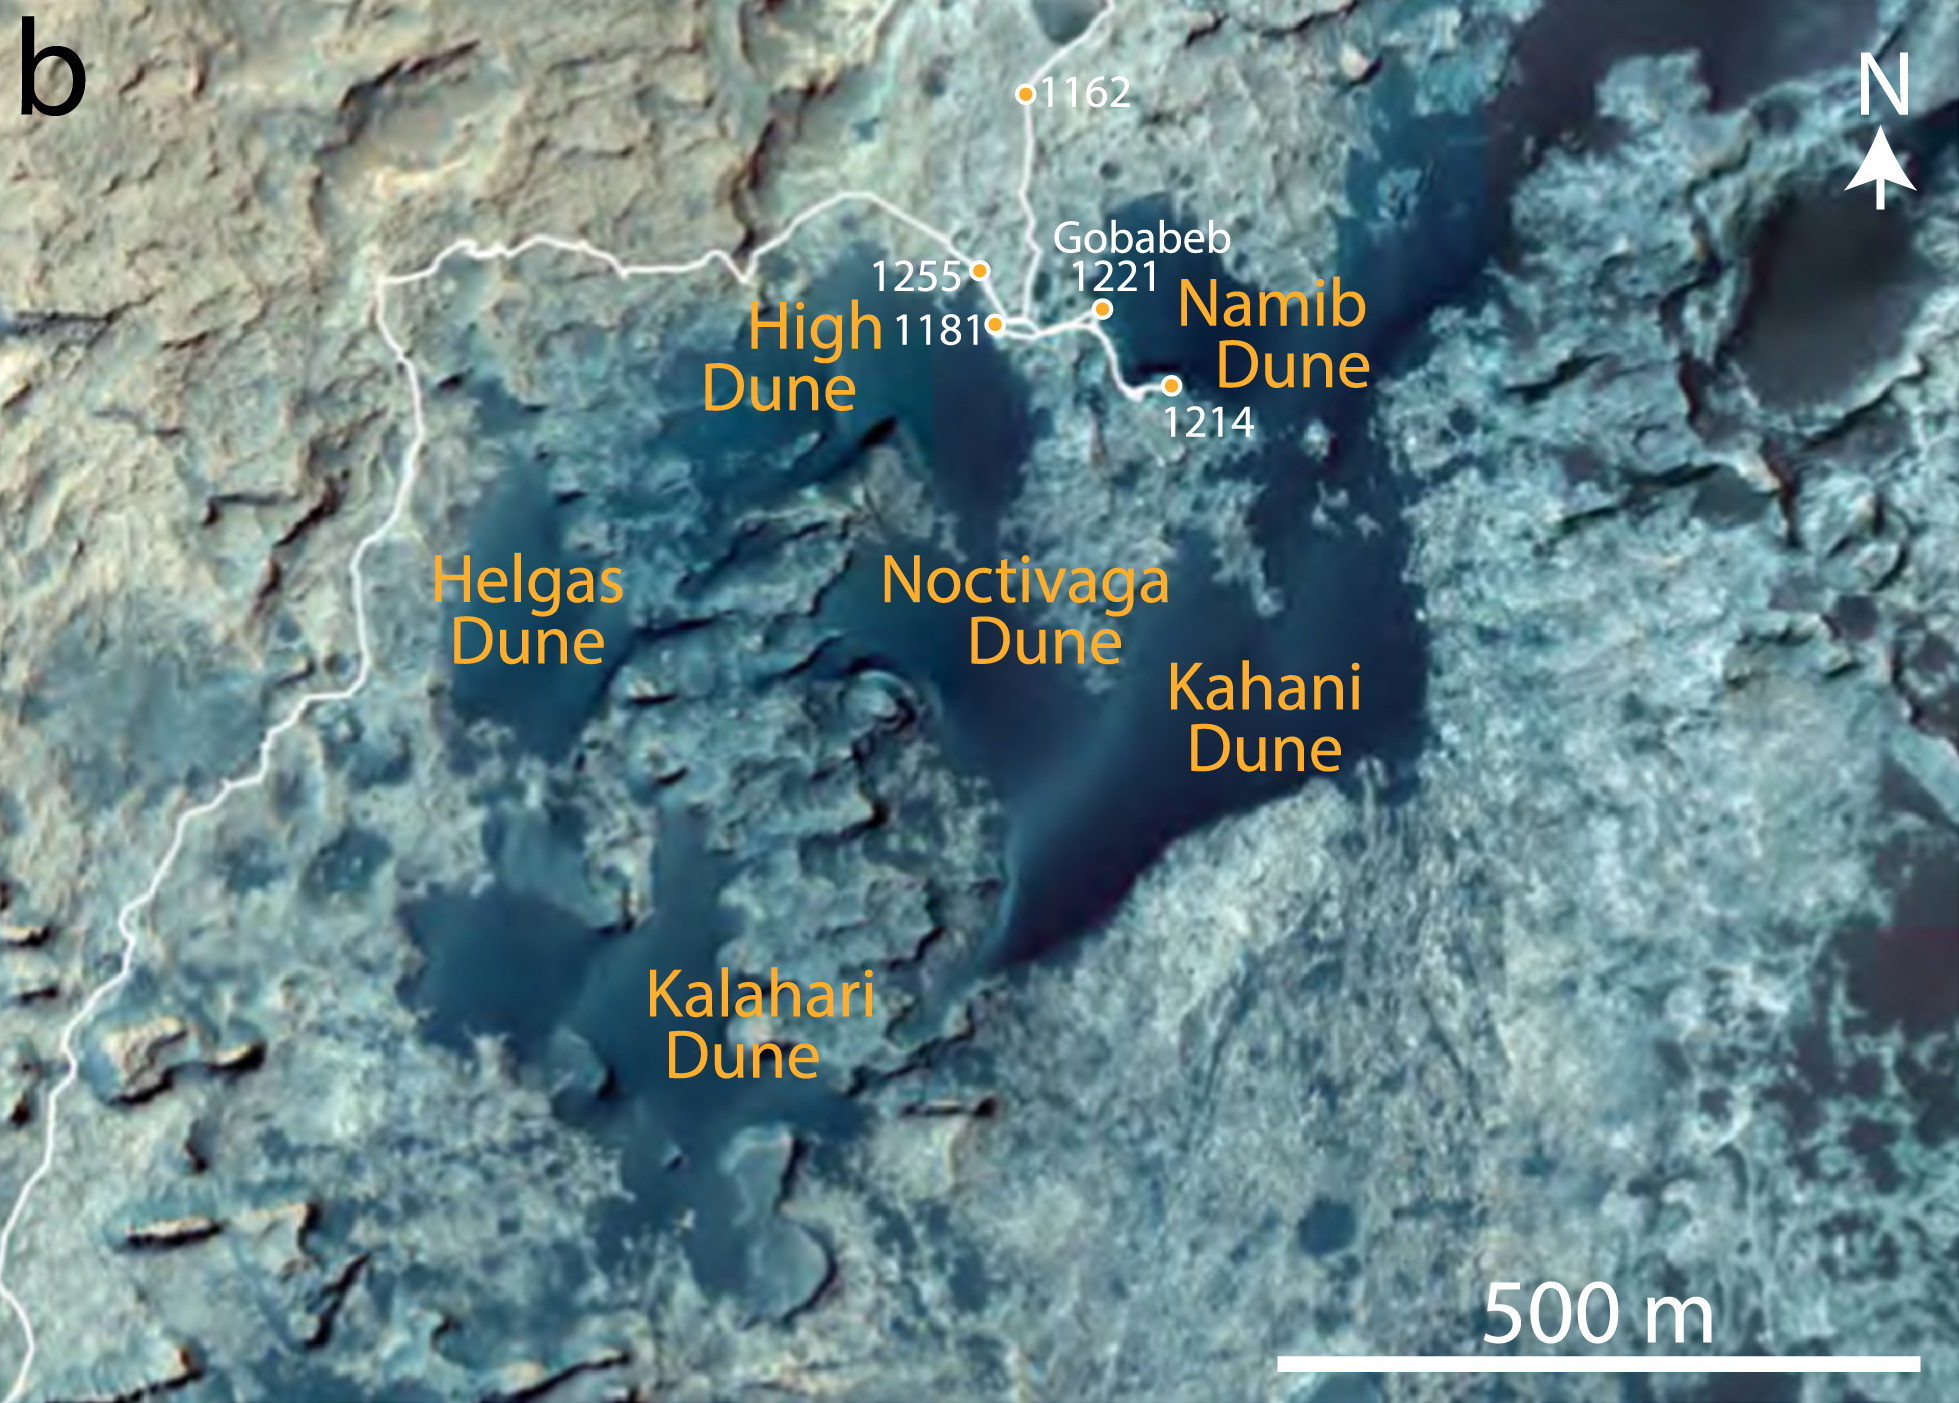 Annotated satellite image showing the area of the Phase 1 investigations